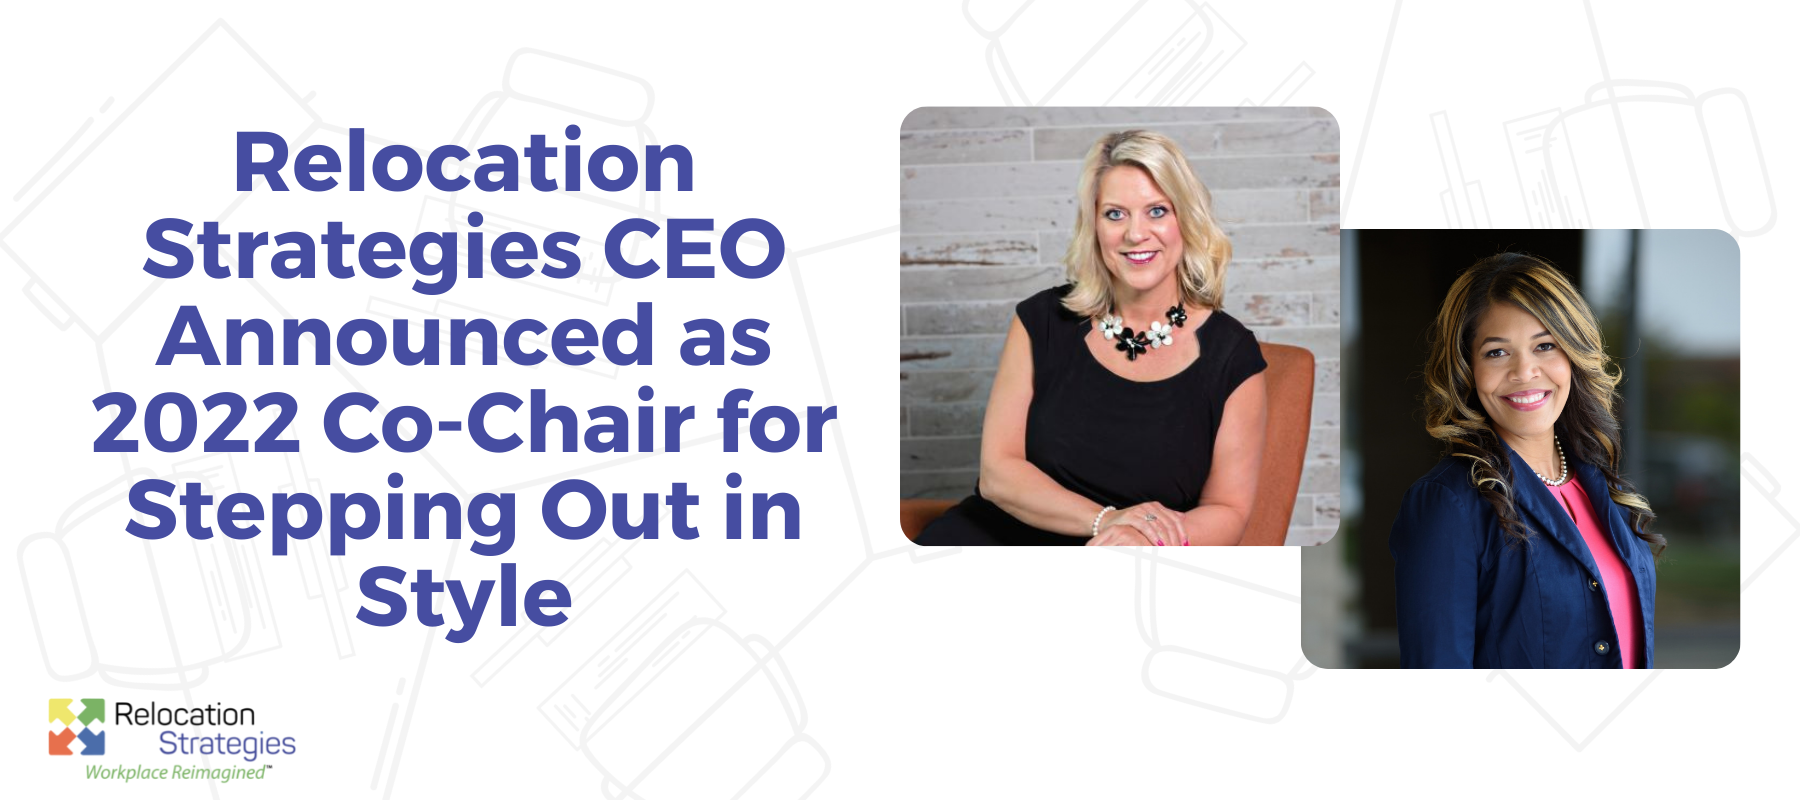 Relocation Strategies CEO Announced as 2022 Co-Chair for Stepping Out in Style